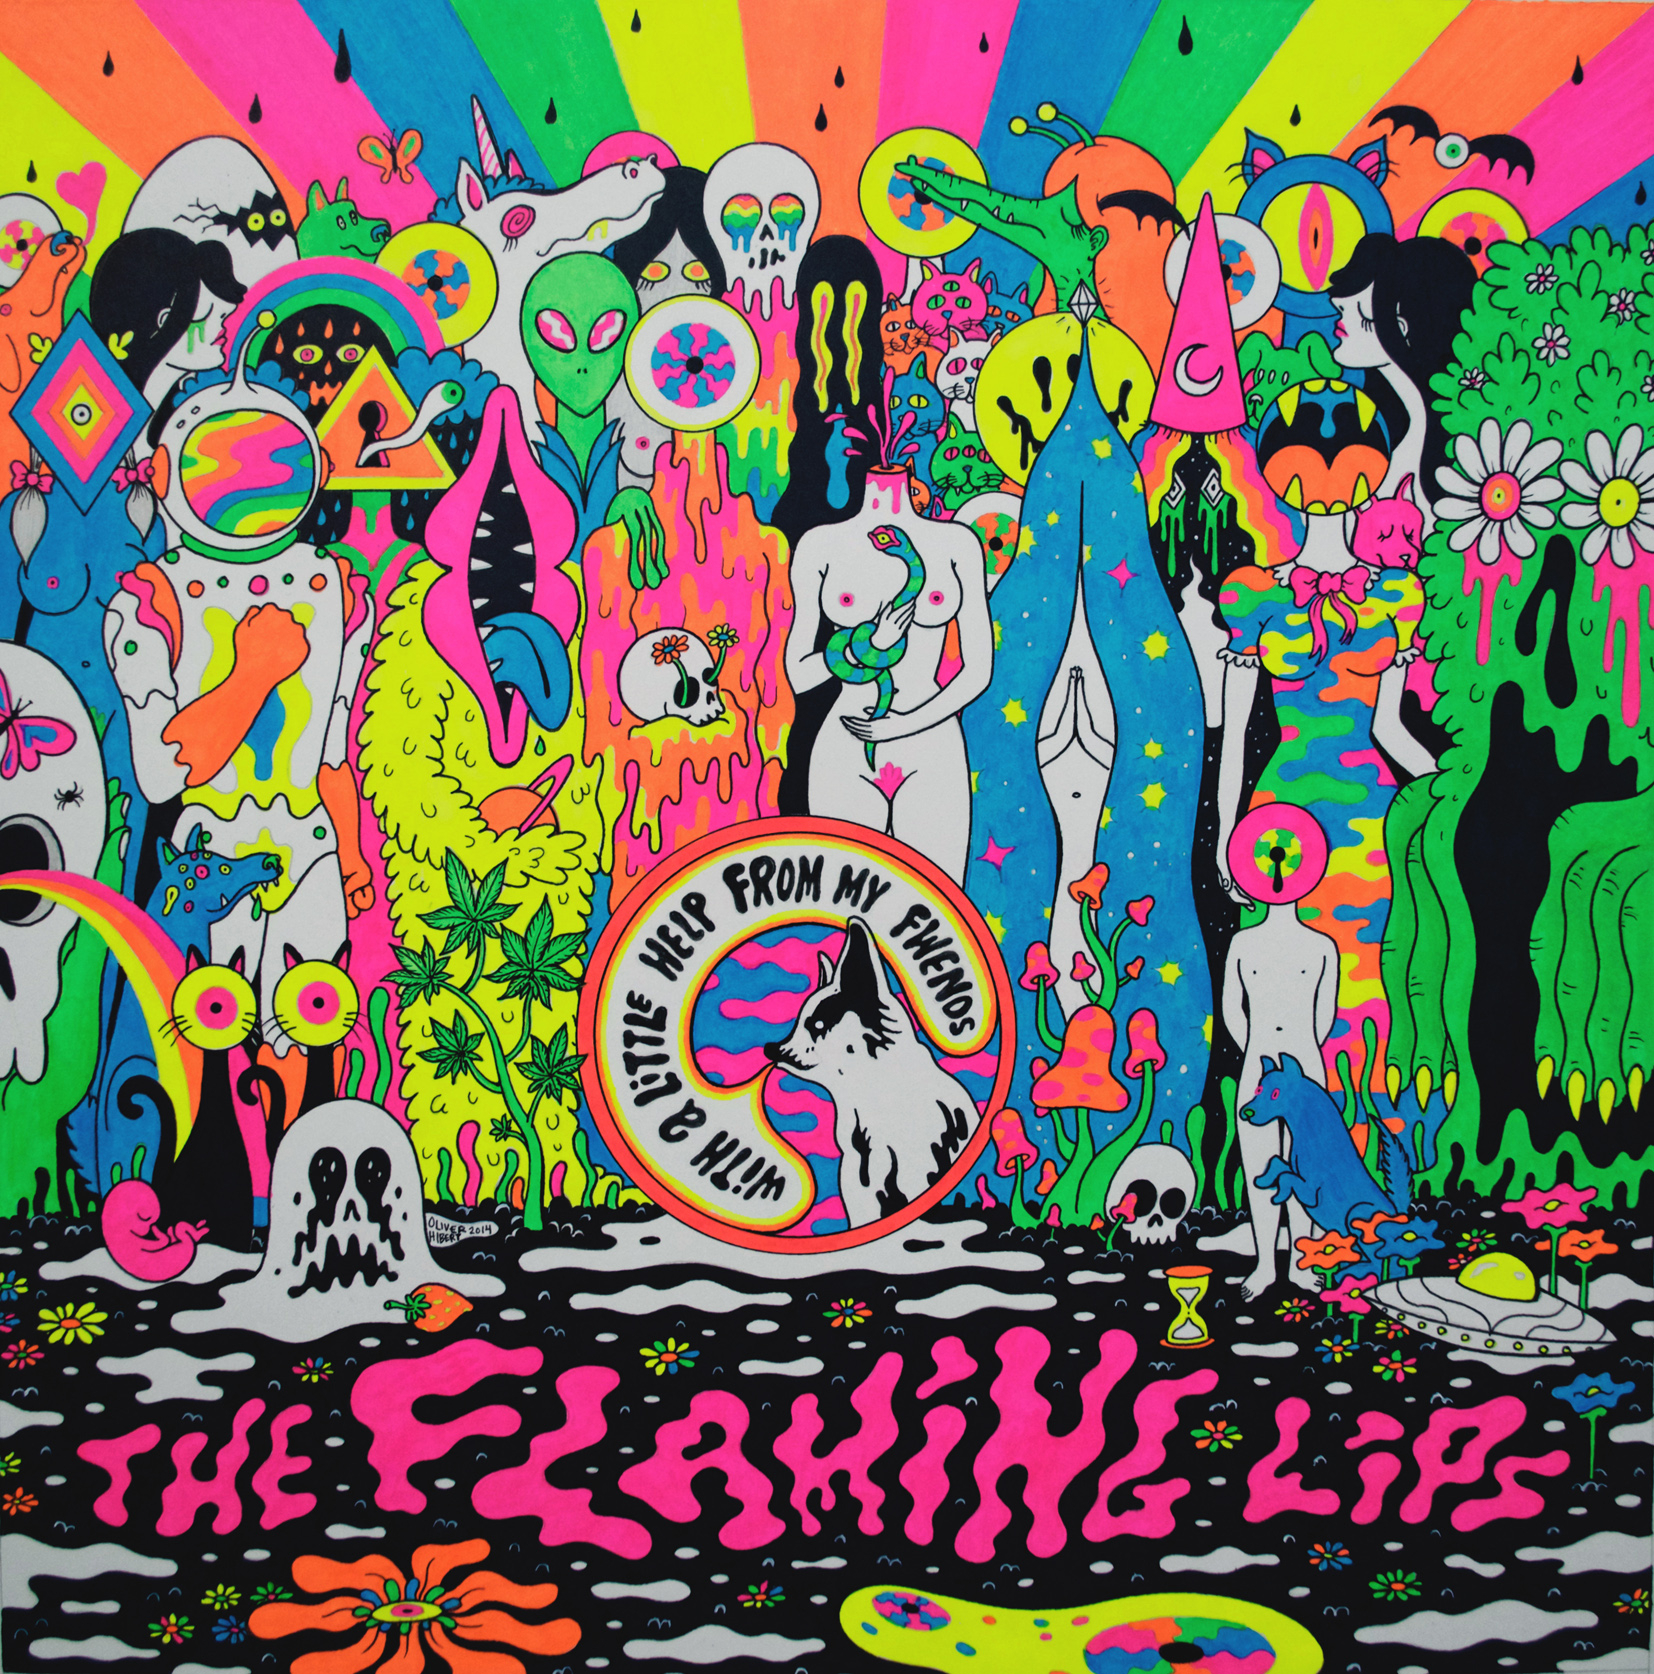 With A Little Help from My Fwends Inside Sleeve / The Flaming Lips